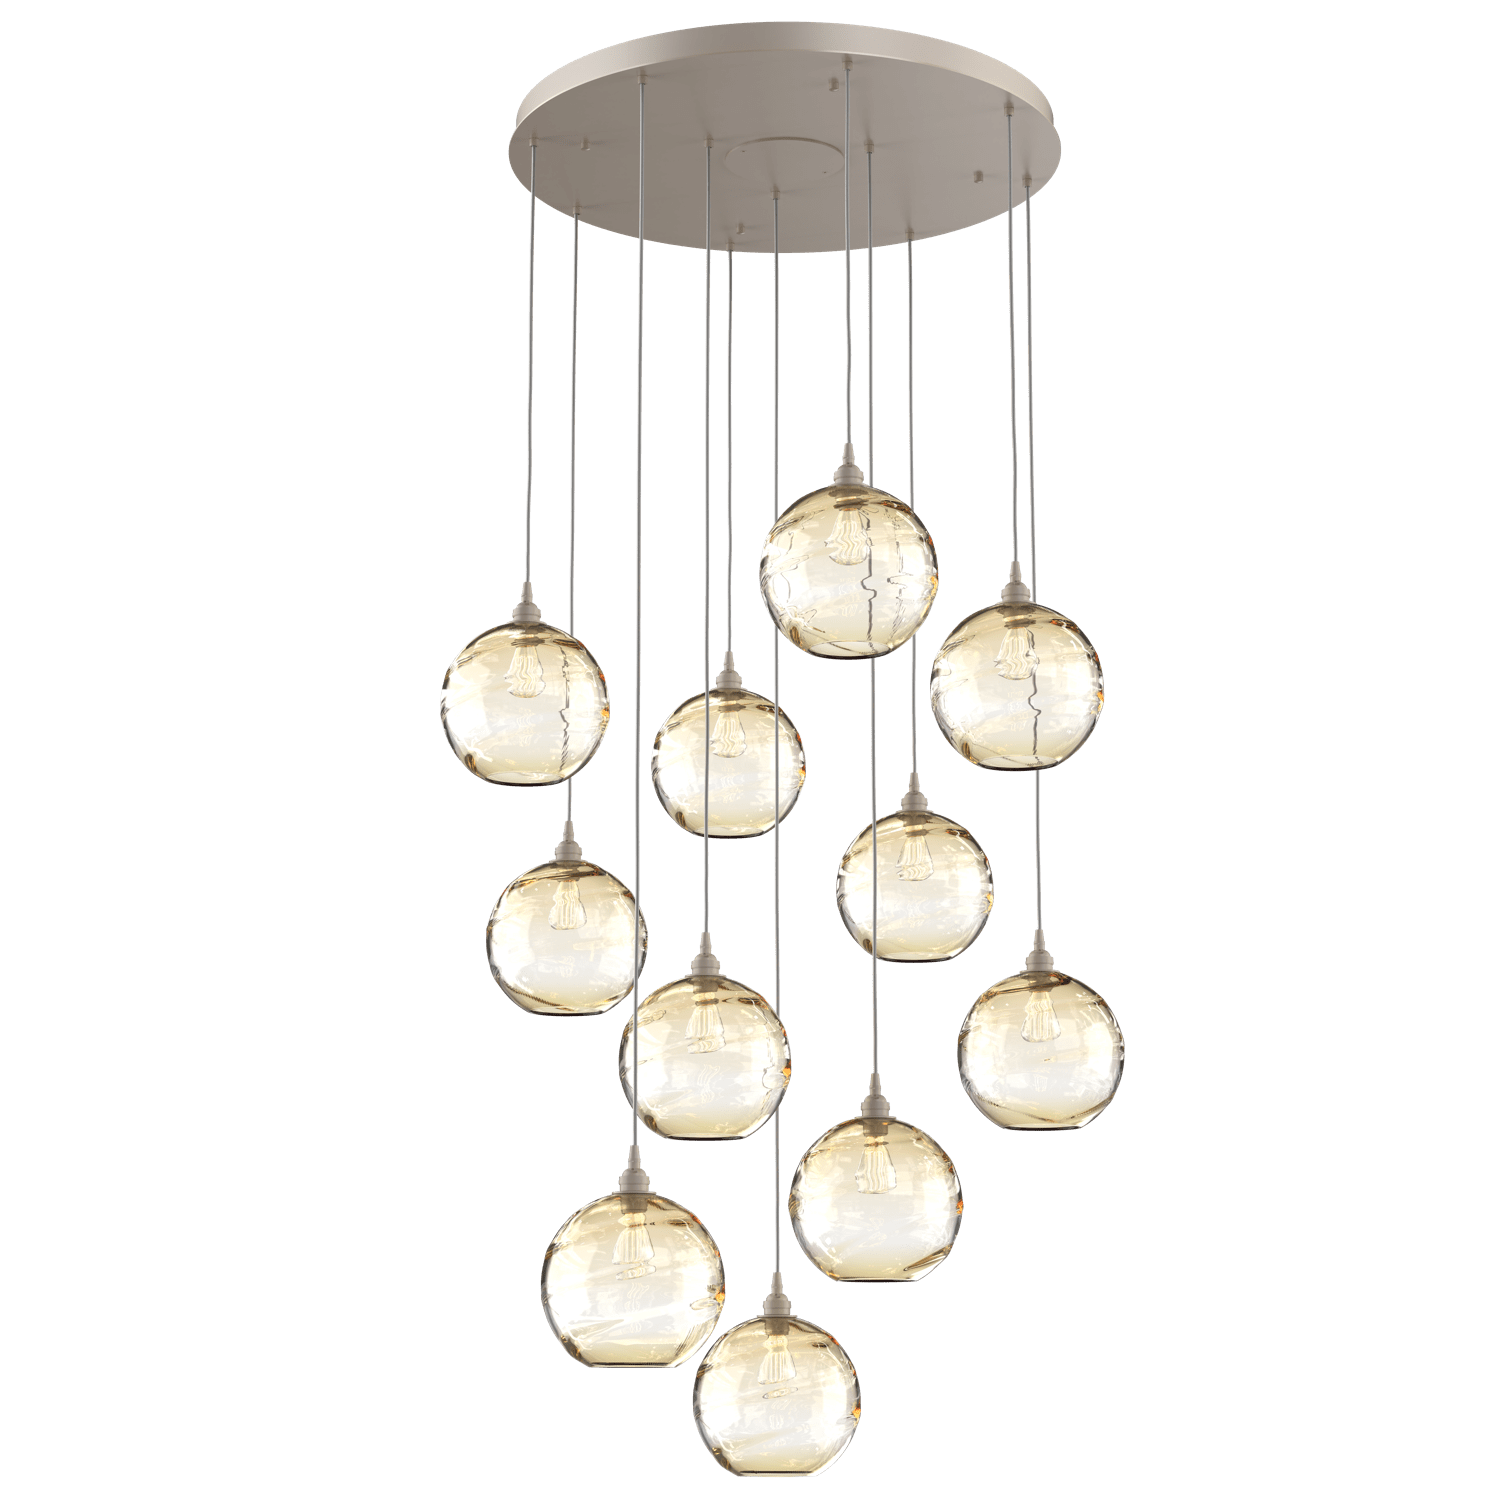 CHB0047-11-BS-OA-Hammerton-Studio-Optic-Blown-Glass-Terra-11-light-round-pendant-chandelier-with-metallic-beige-silver-finish-and-optic-amber-blown-glass-shades-and-incandescent-lamping